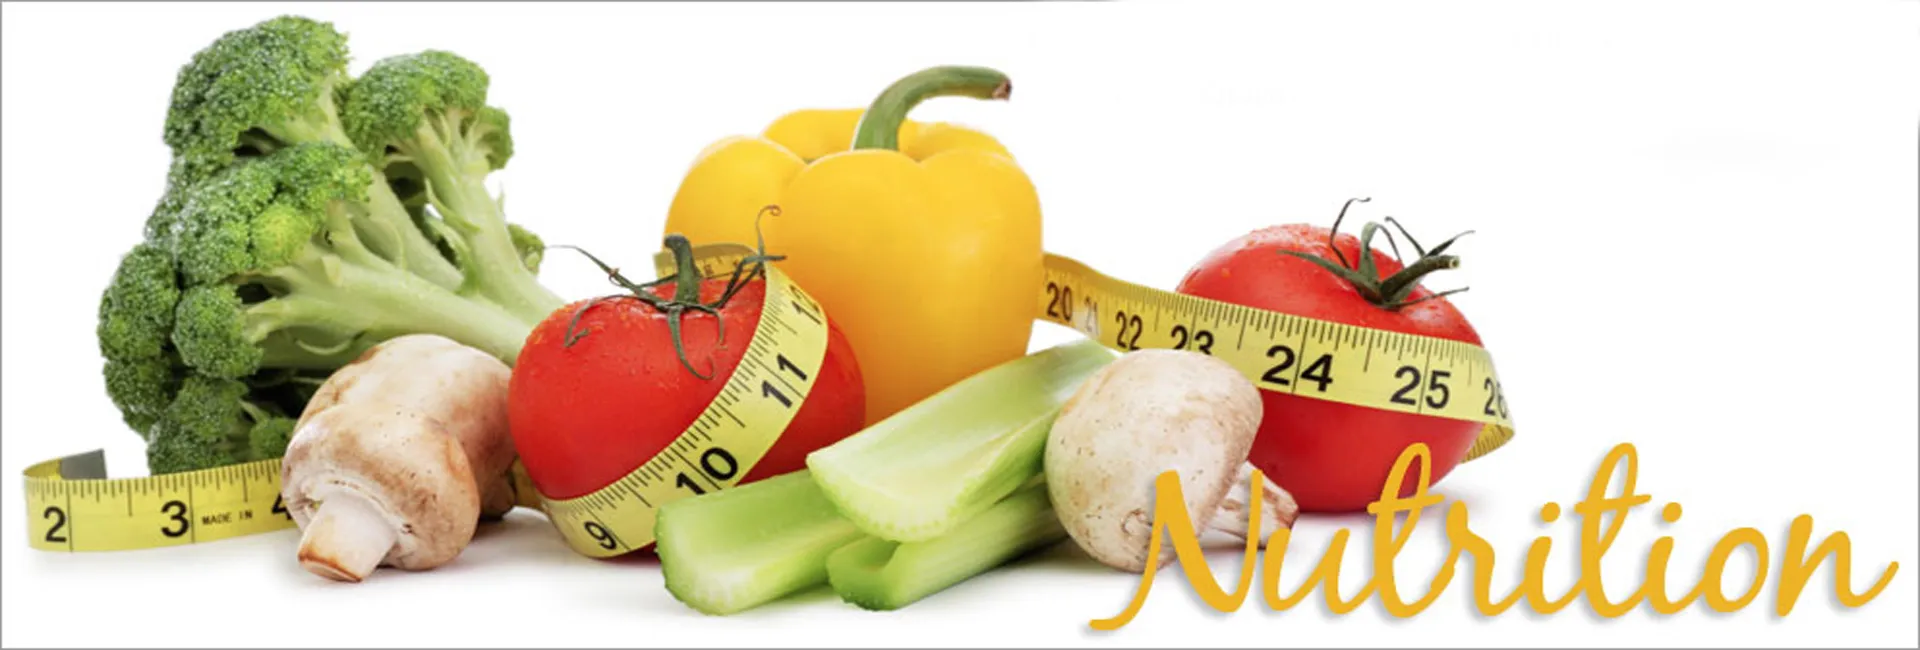 Diet For Sports Nutrition In Abu Dhabi